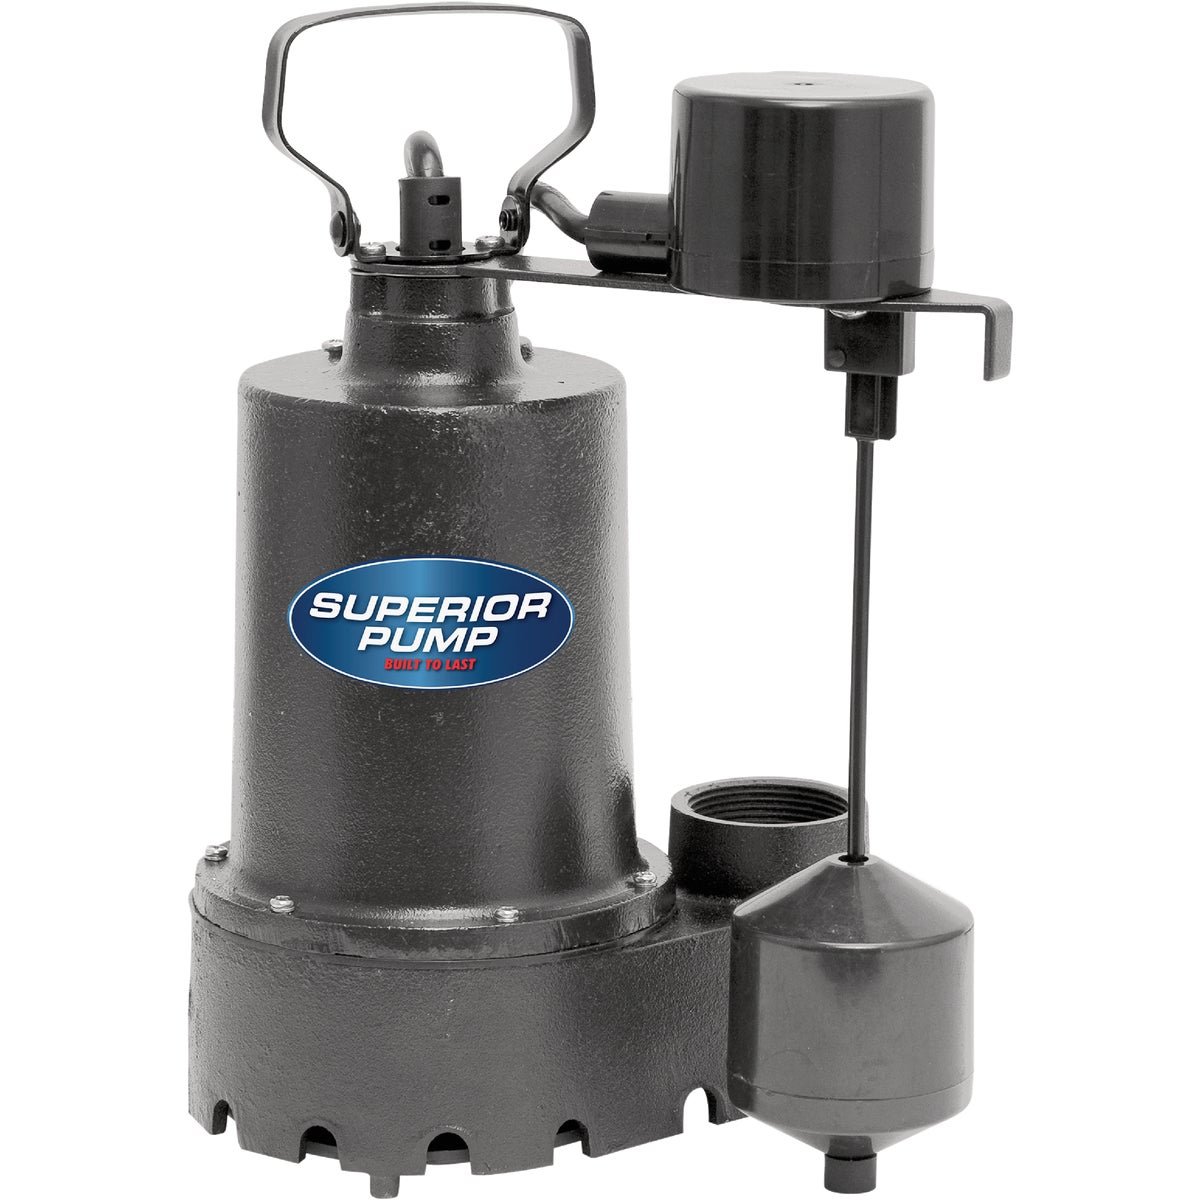 Superior Pump 1/2 HP Cast Iron Submersible Sump Pump with Vertical Float Switch & Stainless Steel Impeller